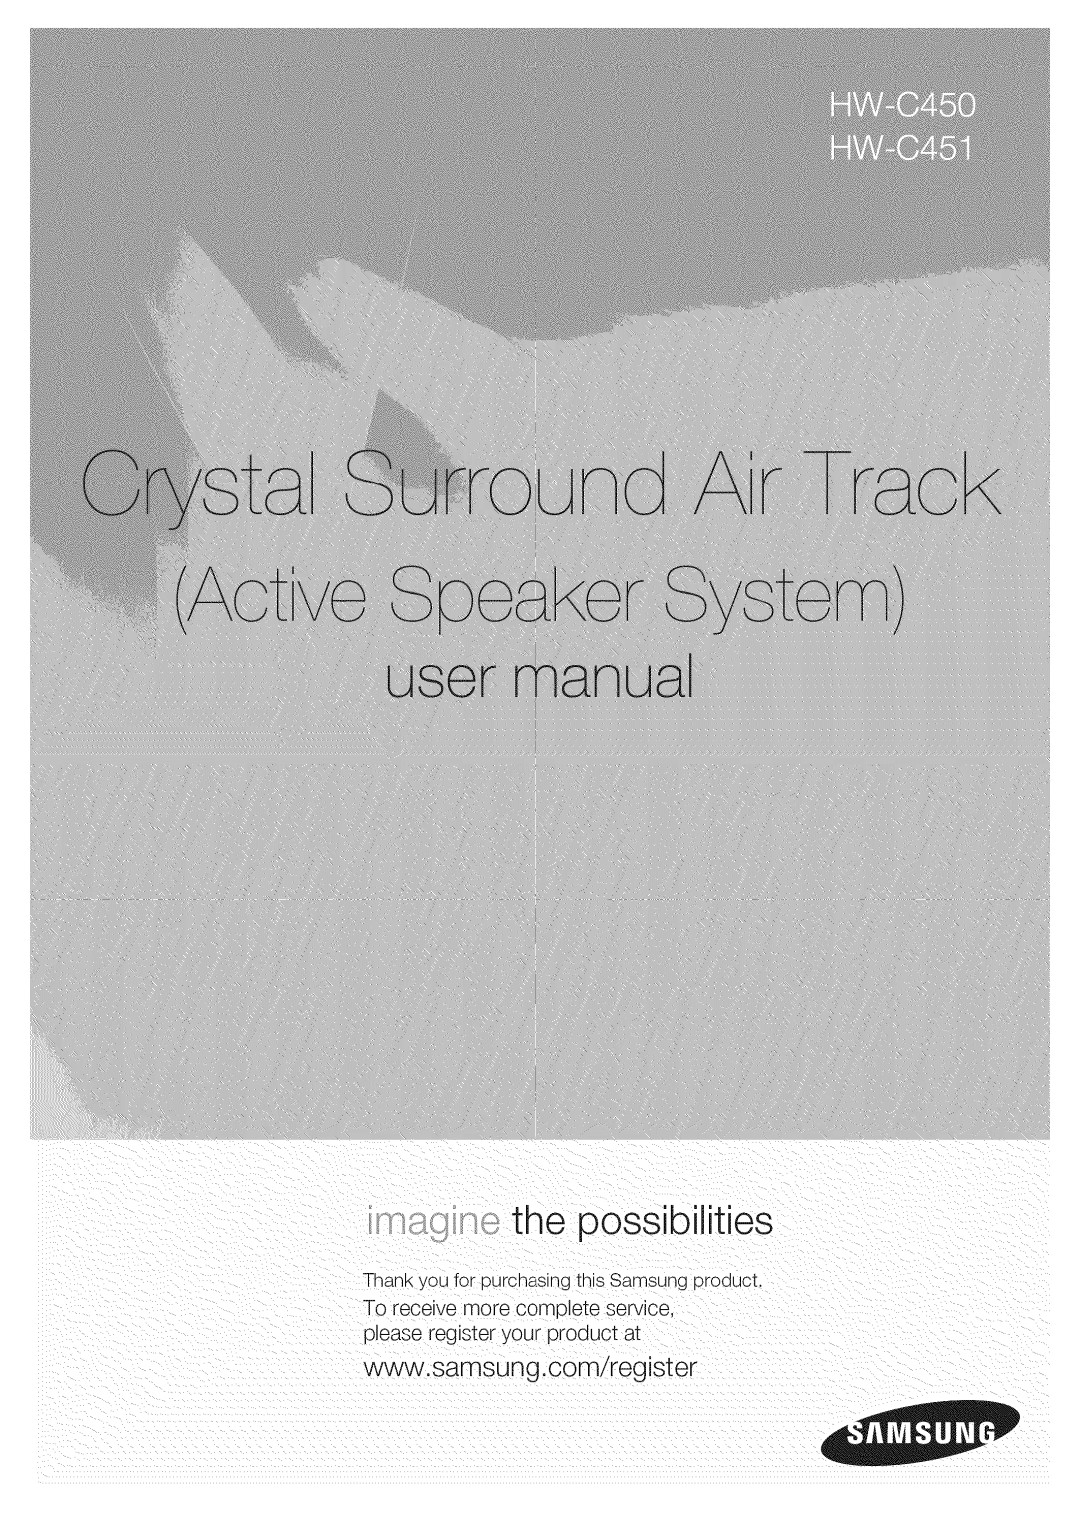 Samsung user manual Crystal Surround Air Track, Active Speaker System, imagine the possibilities, HW-C450 HW-C451 